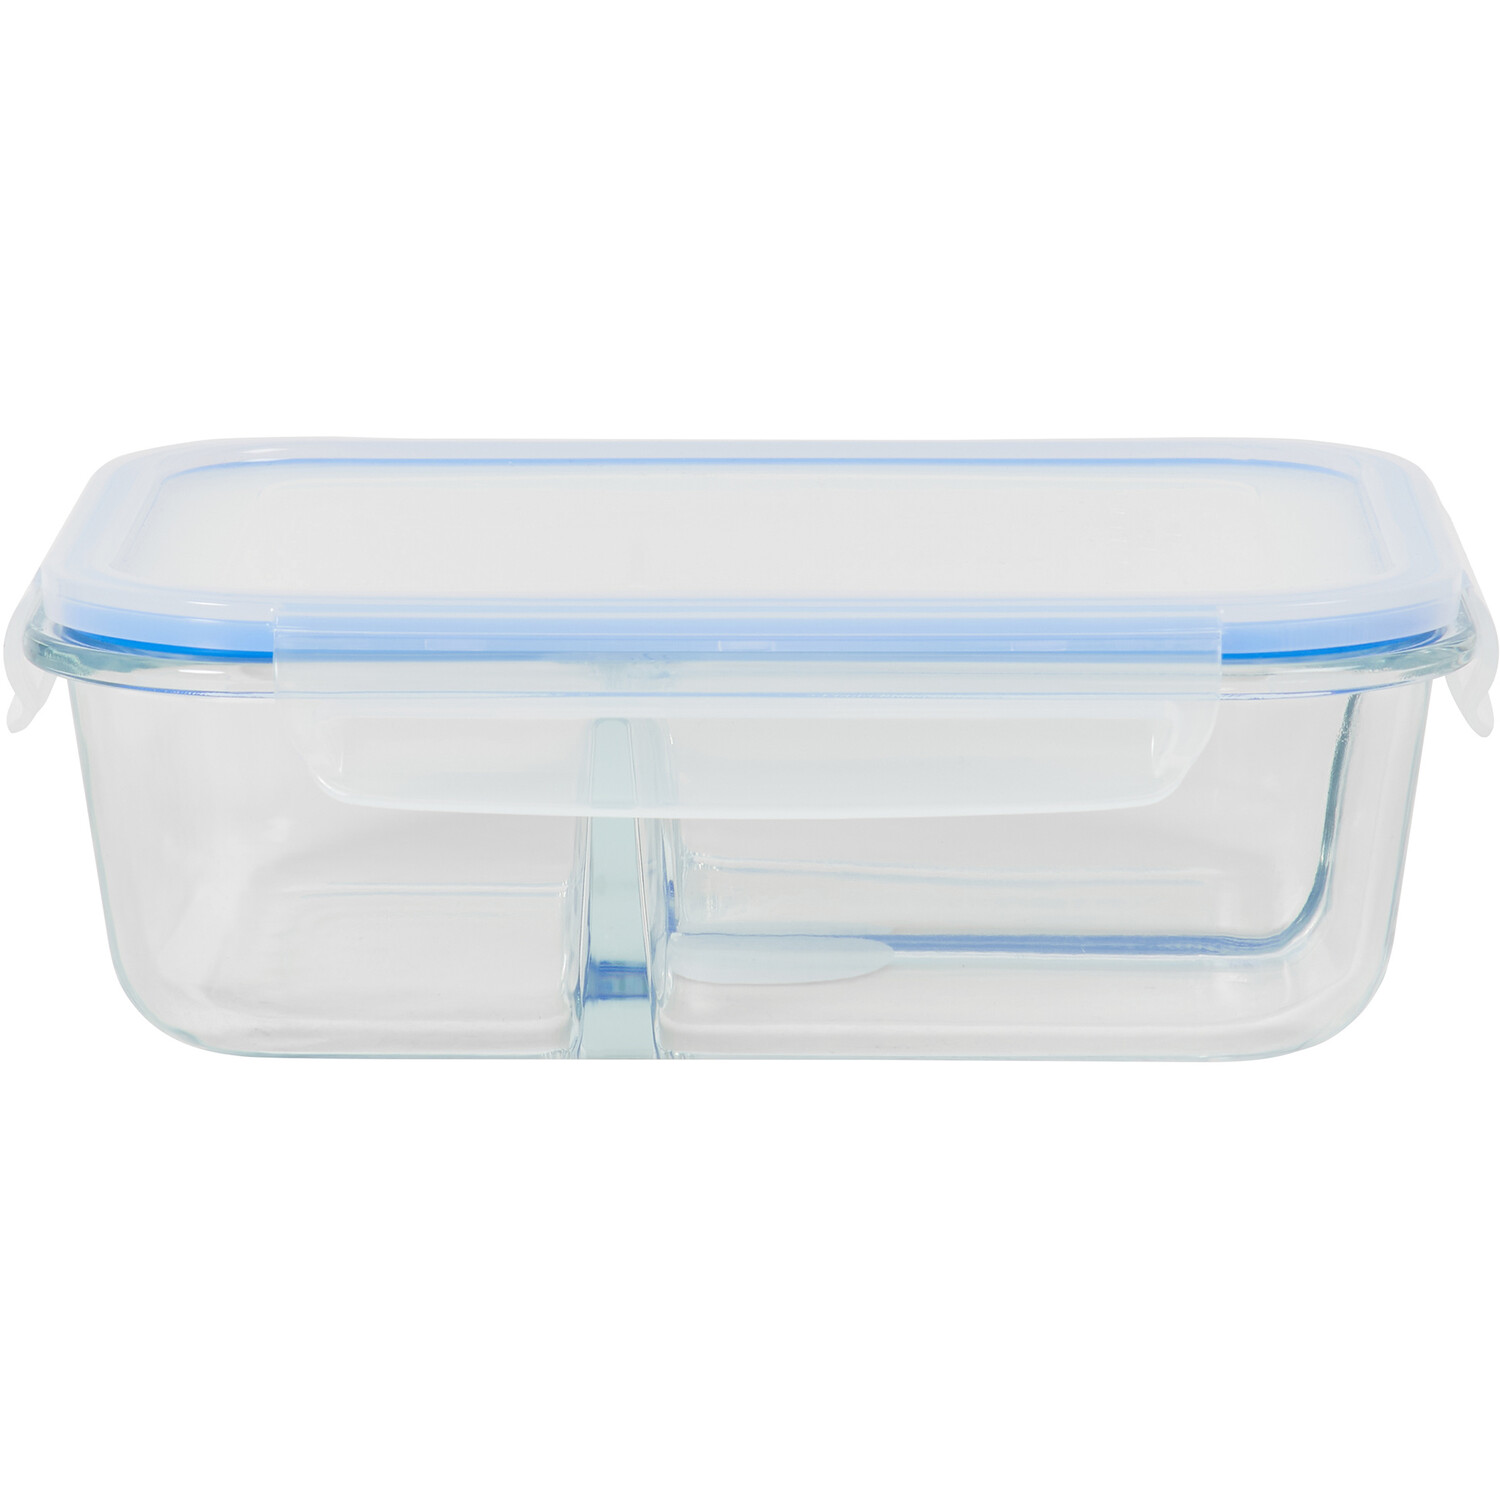 Borosilicate Glass Food Container - Clear Image 1